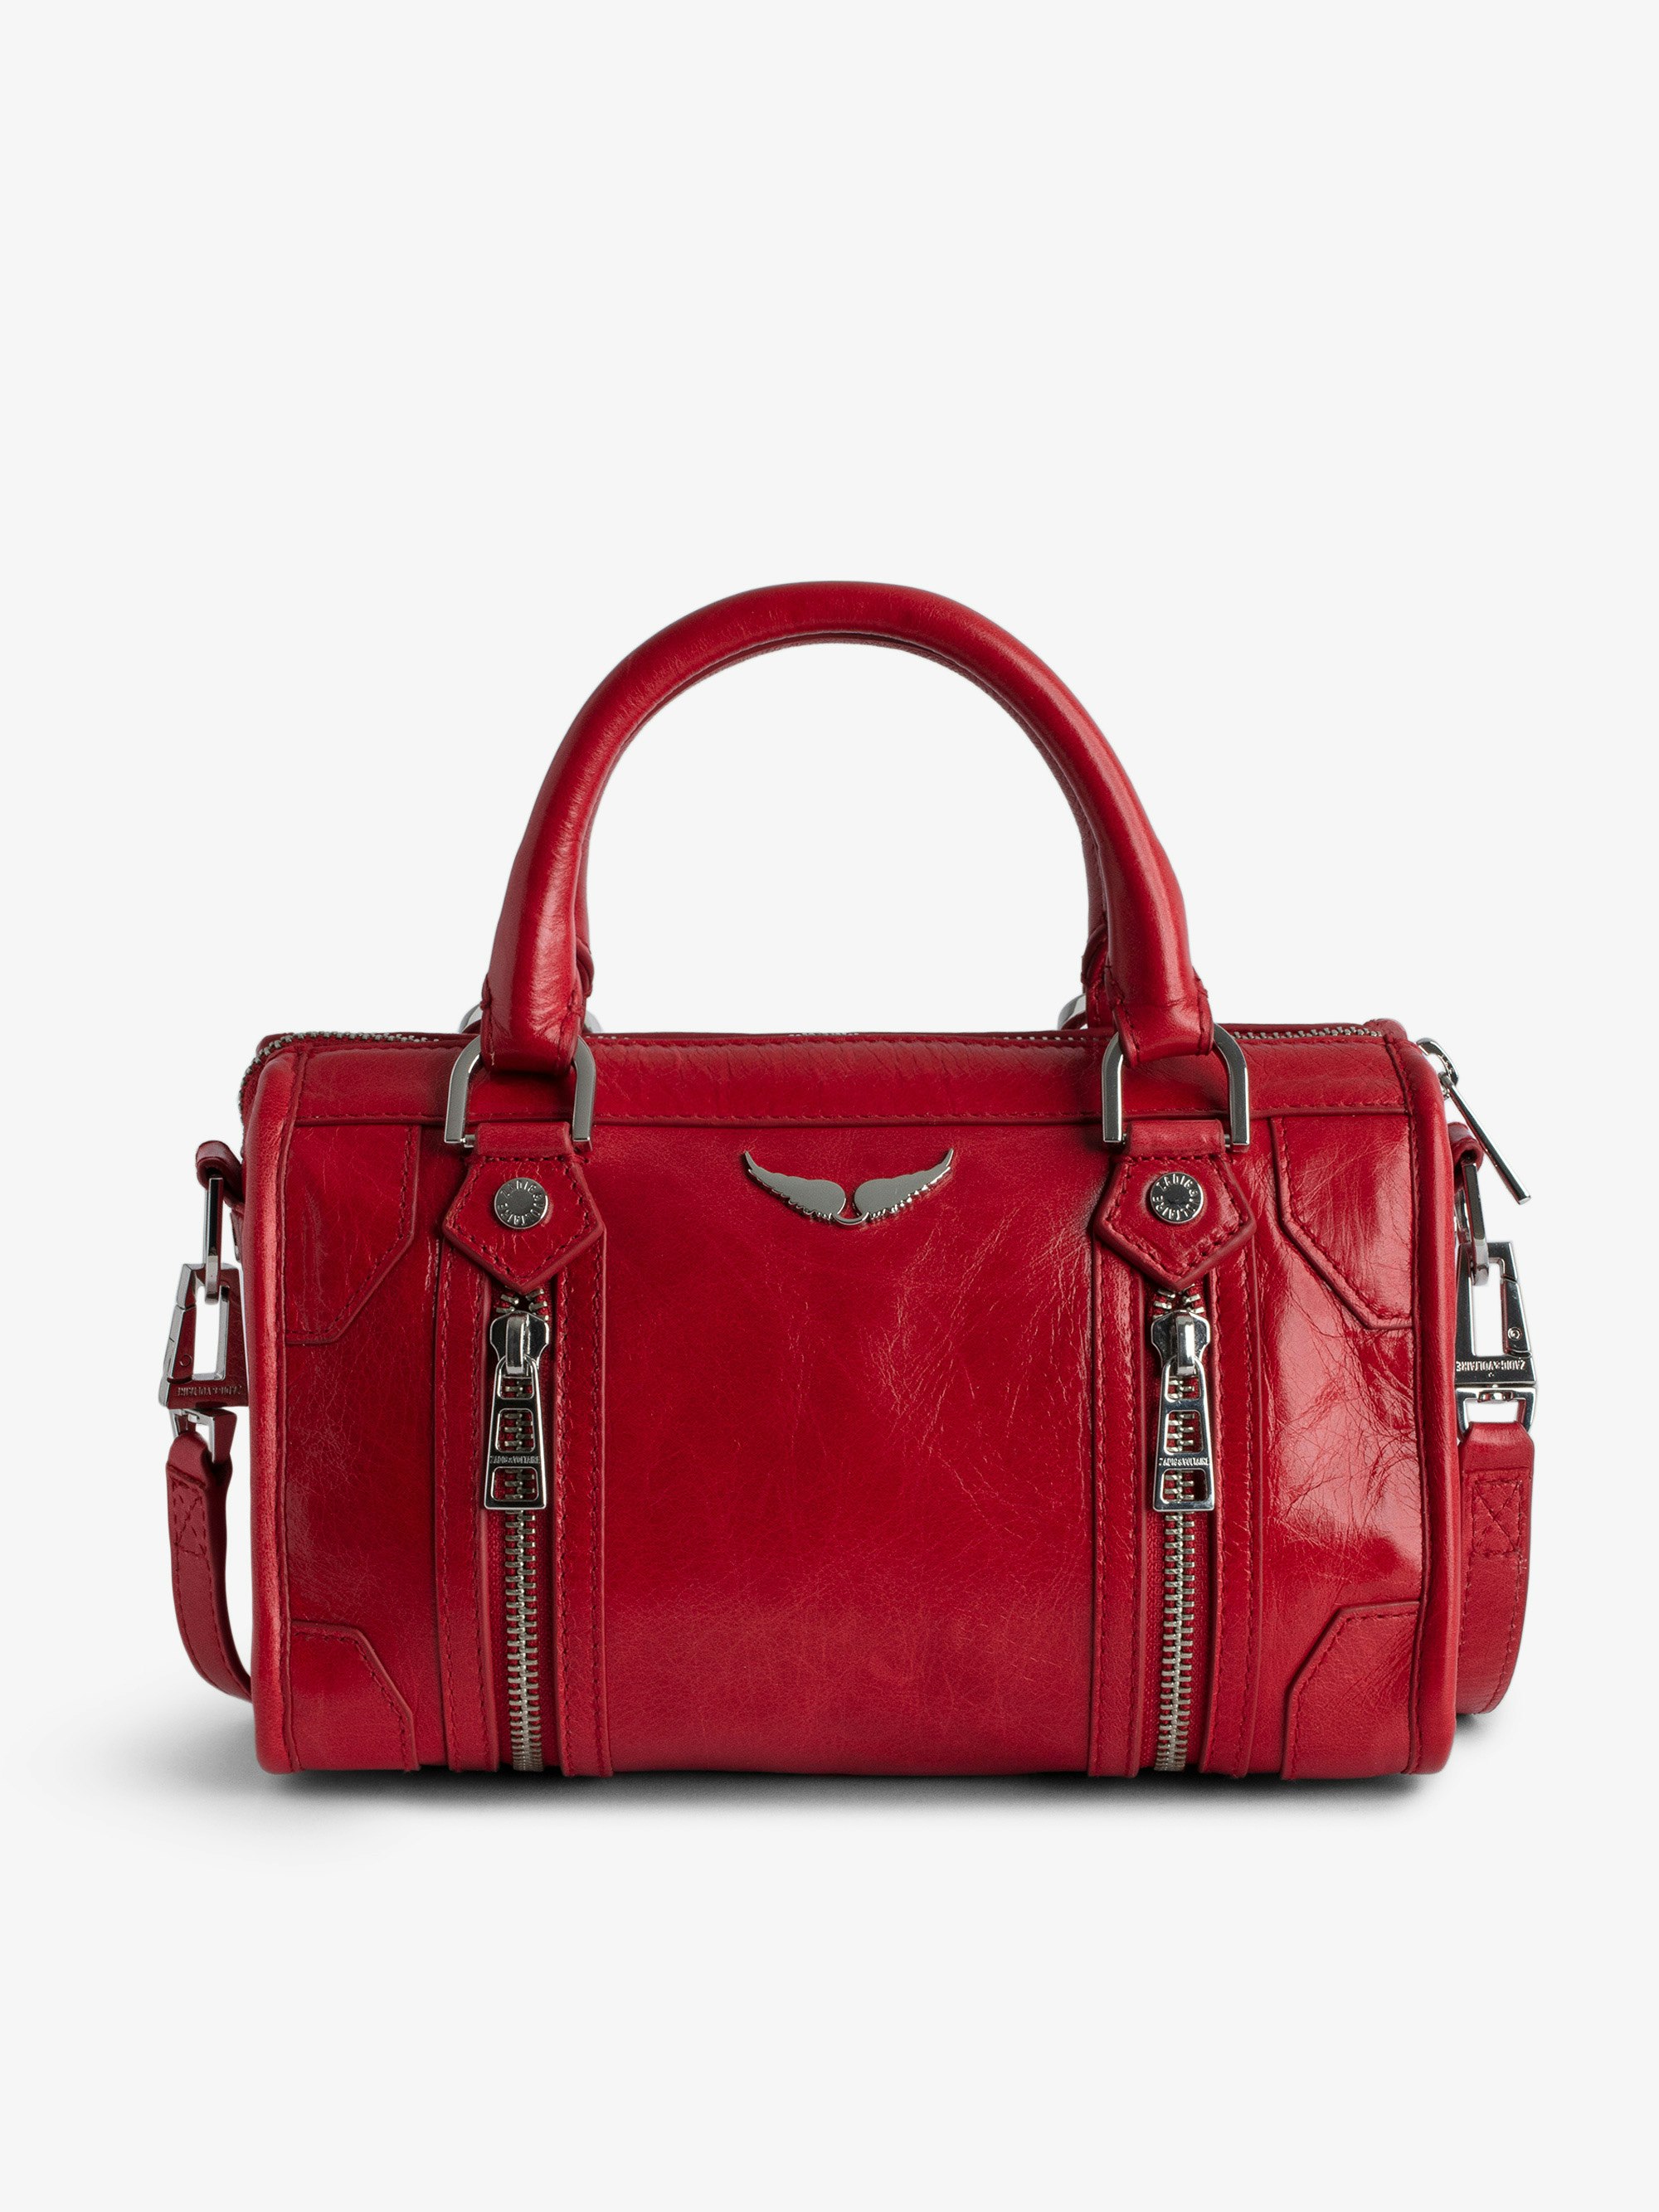 XS Sunny #2 Bag - Small red vintage-effect patent leather bag with short handles and shoulder strap.